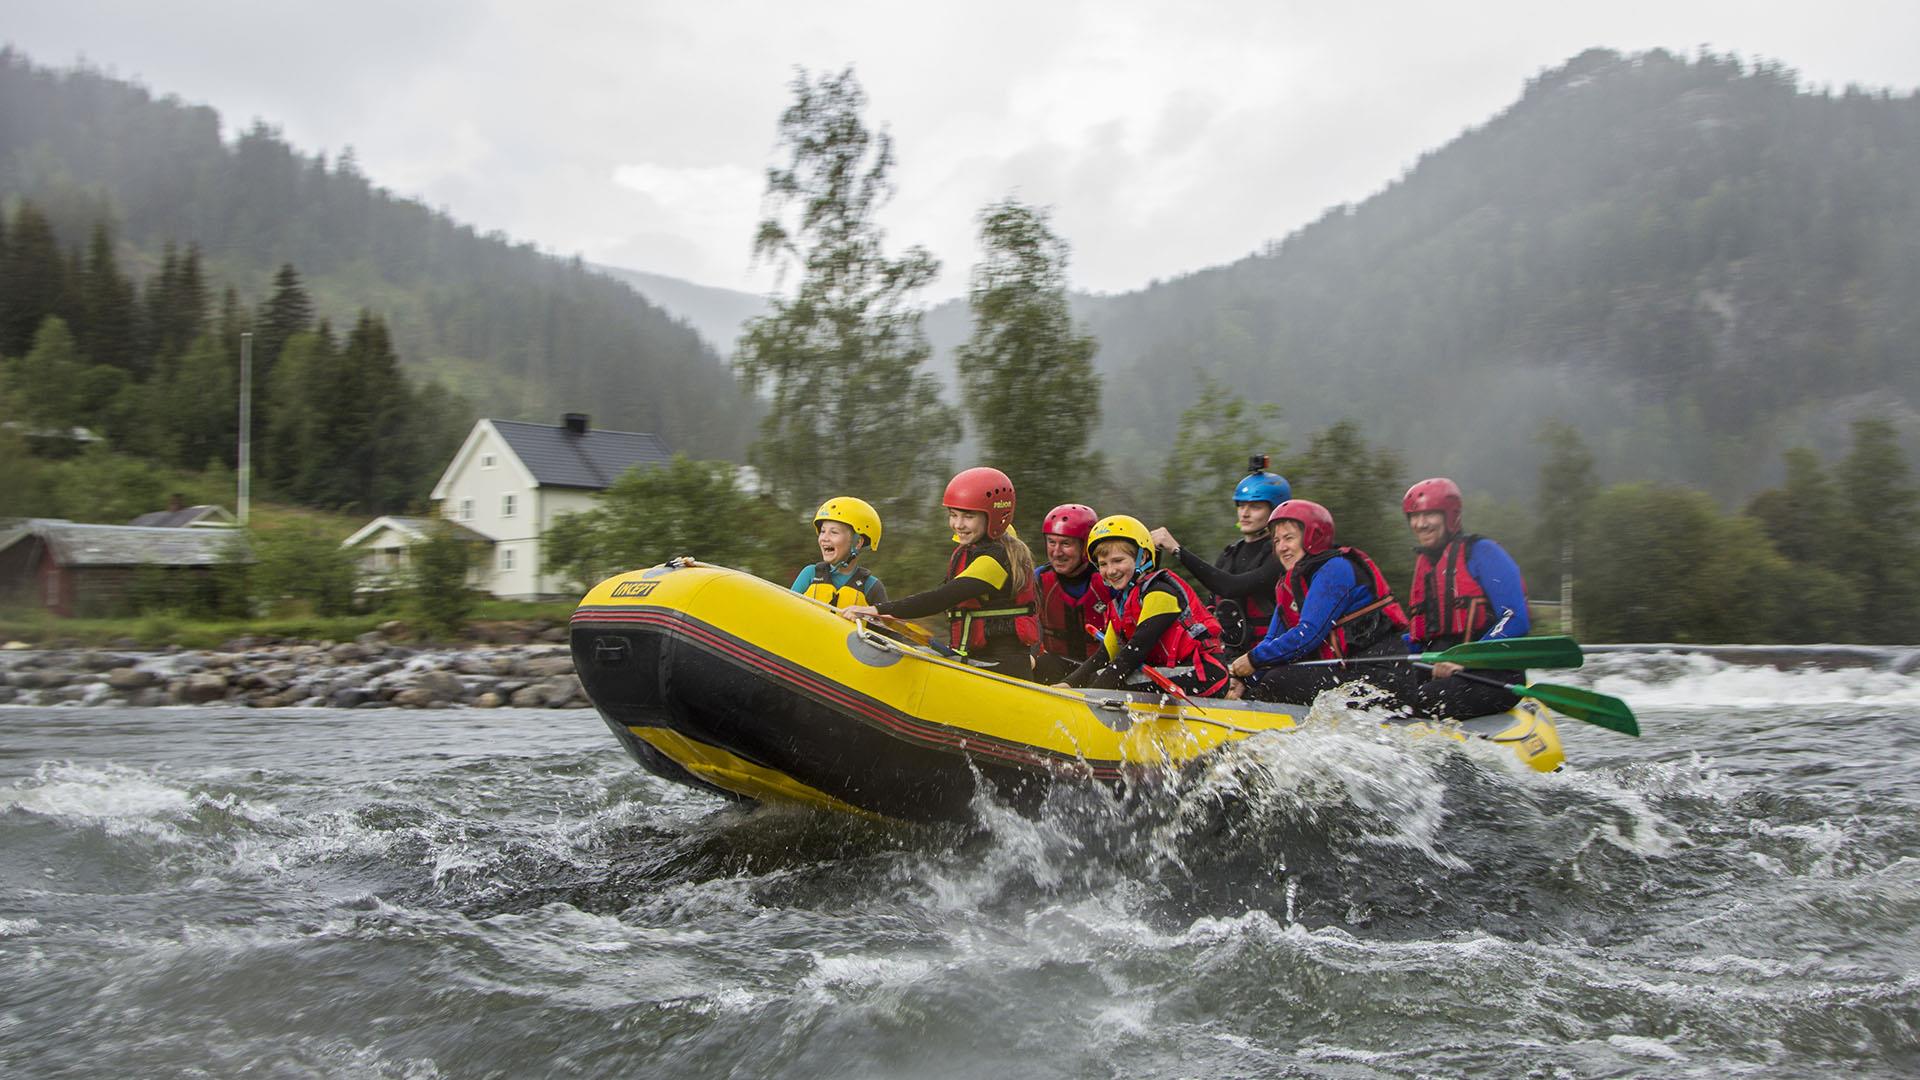 A rafting boat with kids and guides in a rapid on a river on a gray day.